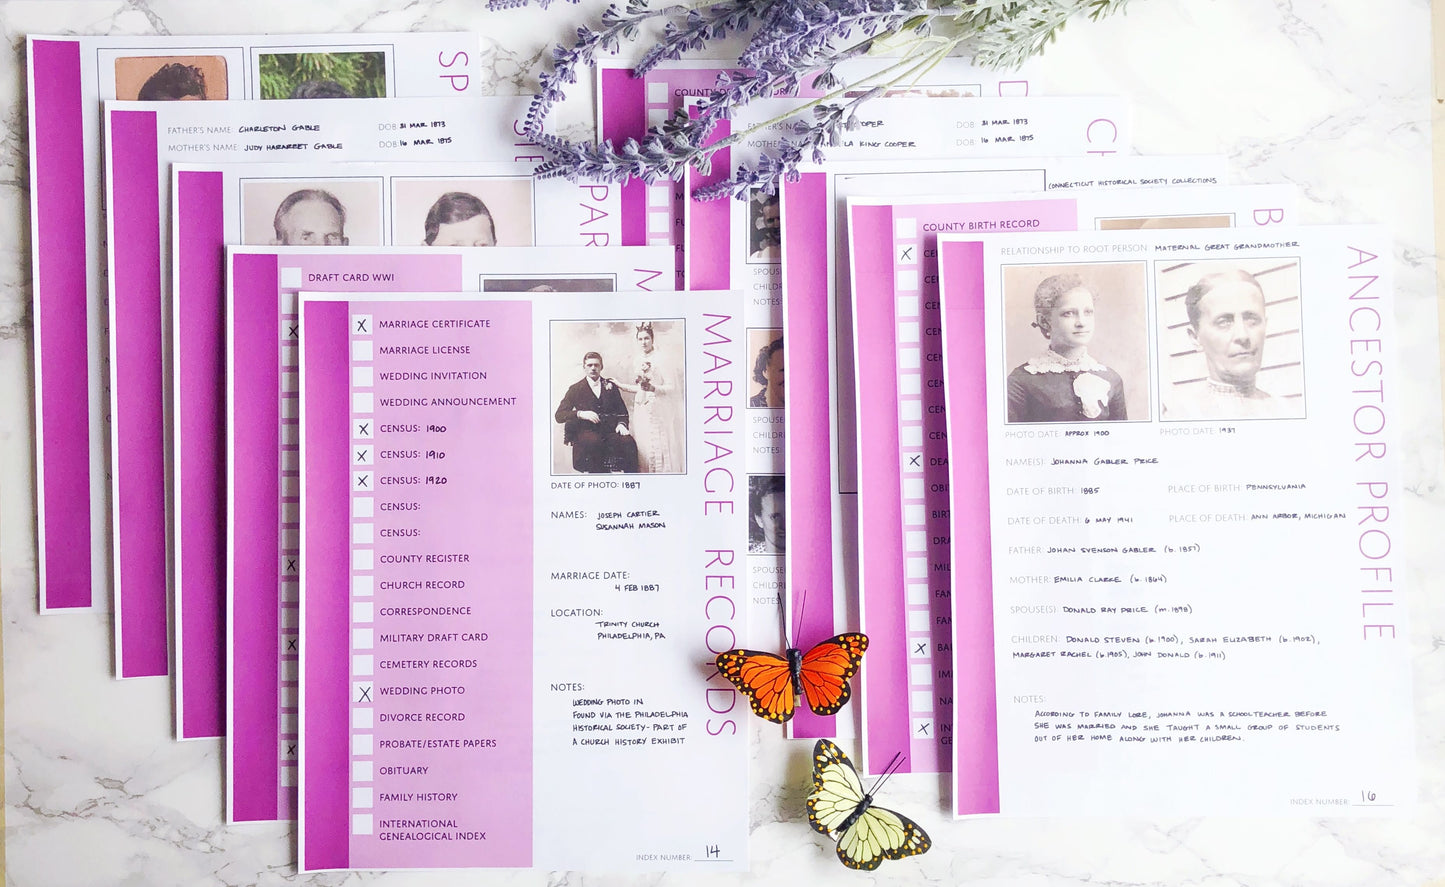 USA Deluxe Family History Bundle - Purple (Digital Download)